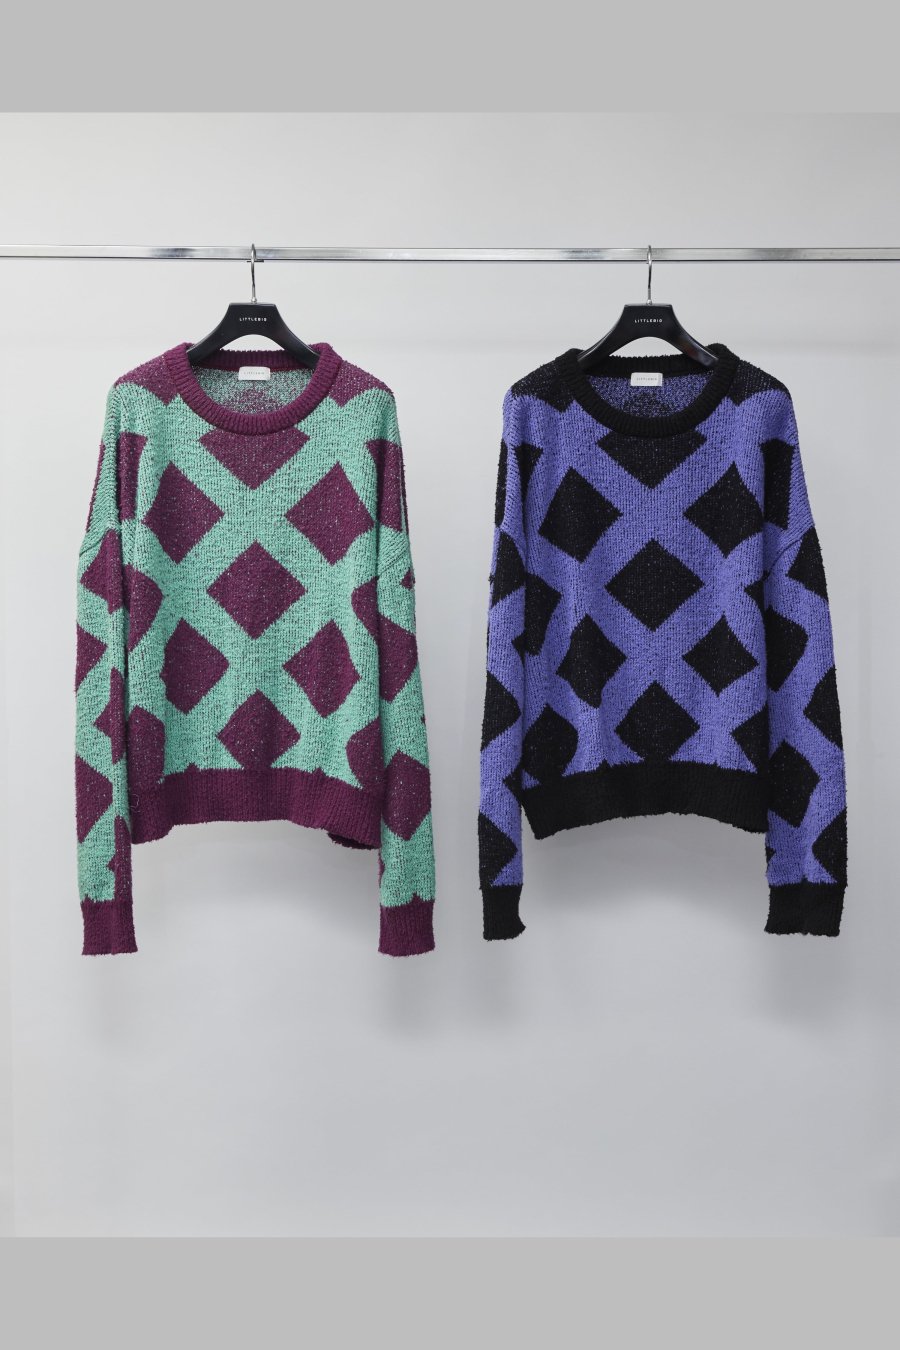 LITTLEBIG  Checked Knit(Green or Purple)<img class='new_mark_img2' src='https://img.shop-pro.jp/img/new/icons15.gif' style='border:none;display:inline;margin:0px;padding:0px;width:auto;' />